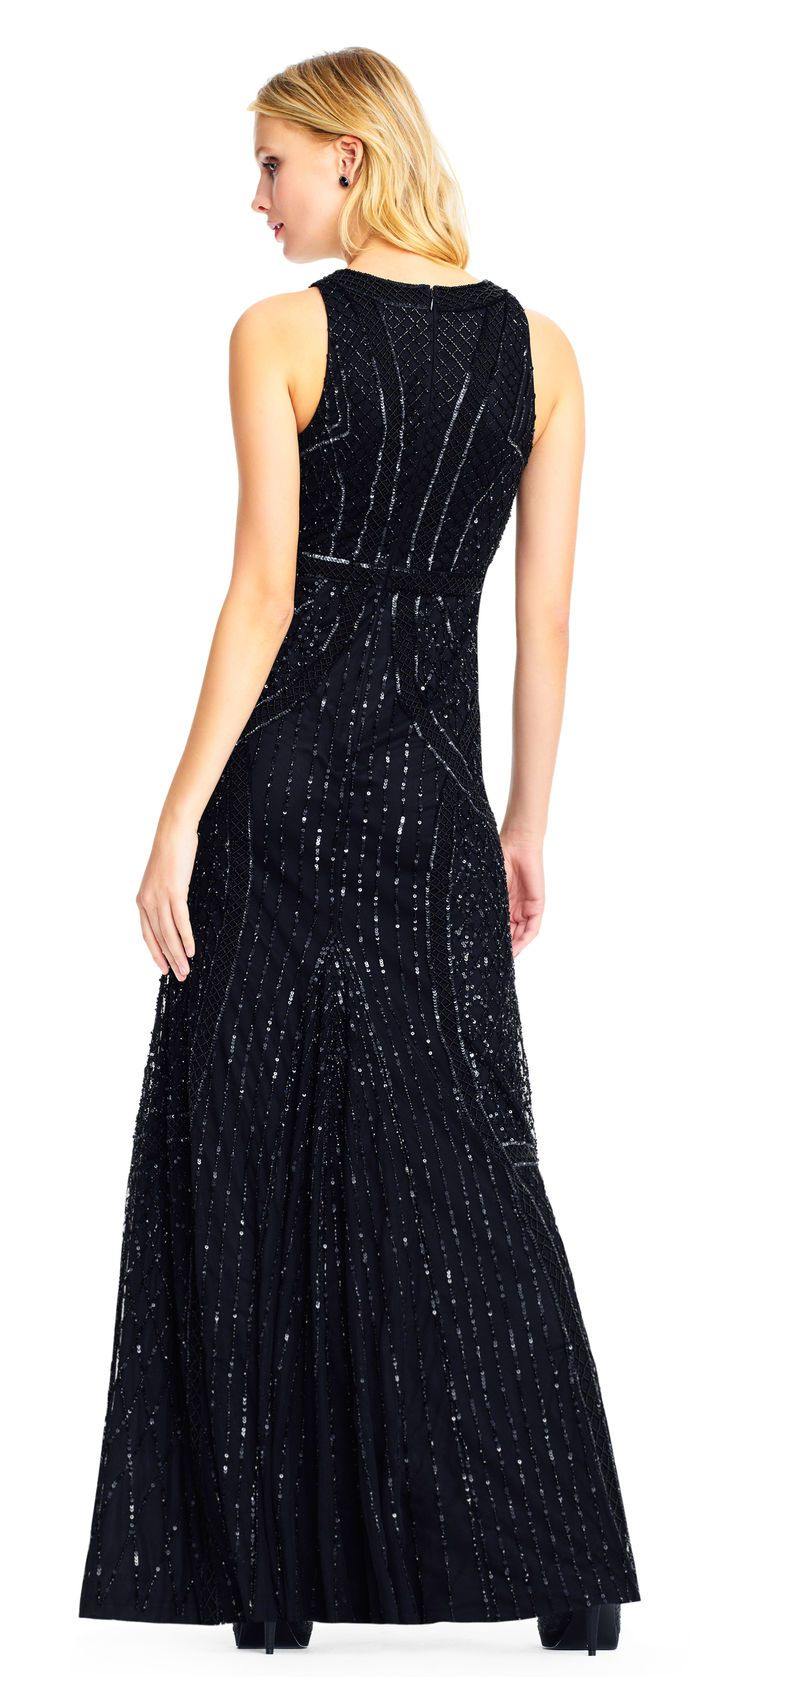 Adrianna Papell Long Formal Embellished Mesh Dress - The Dress Outlet Adrianna Papell